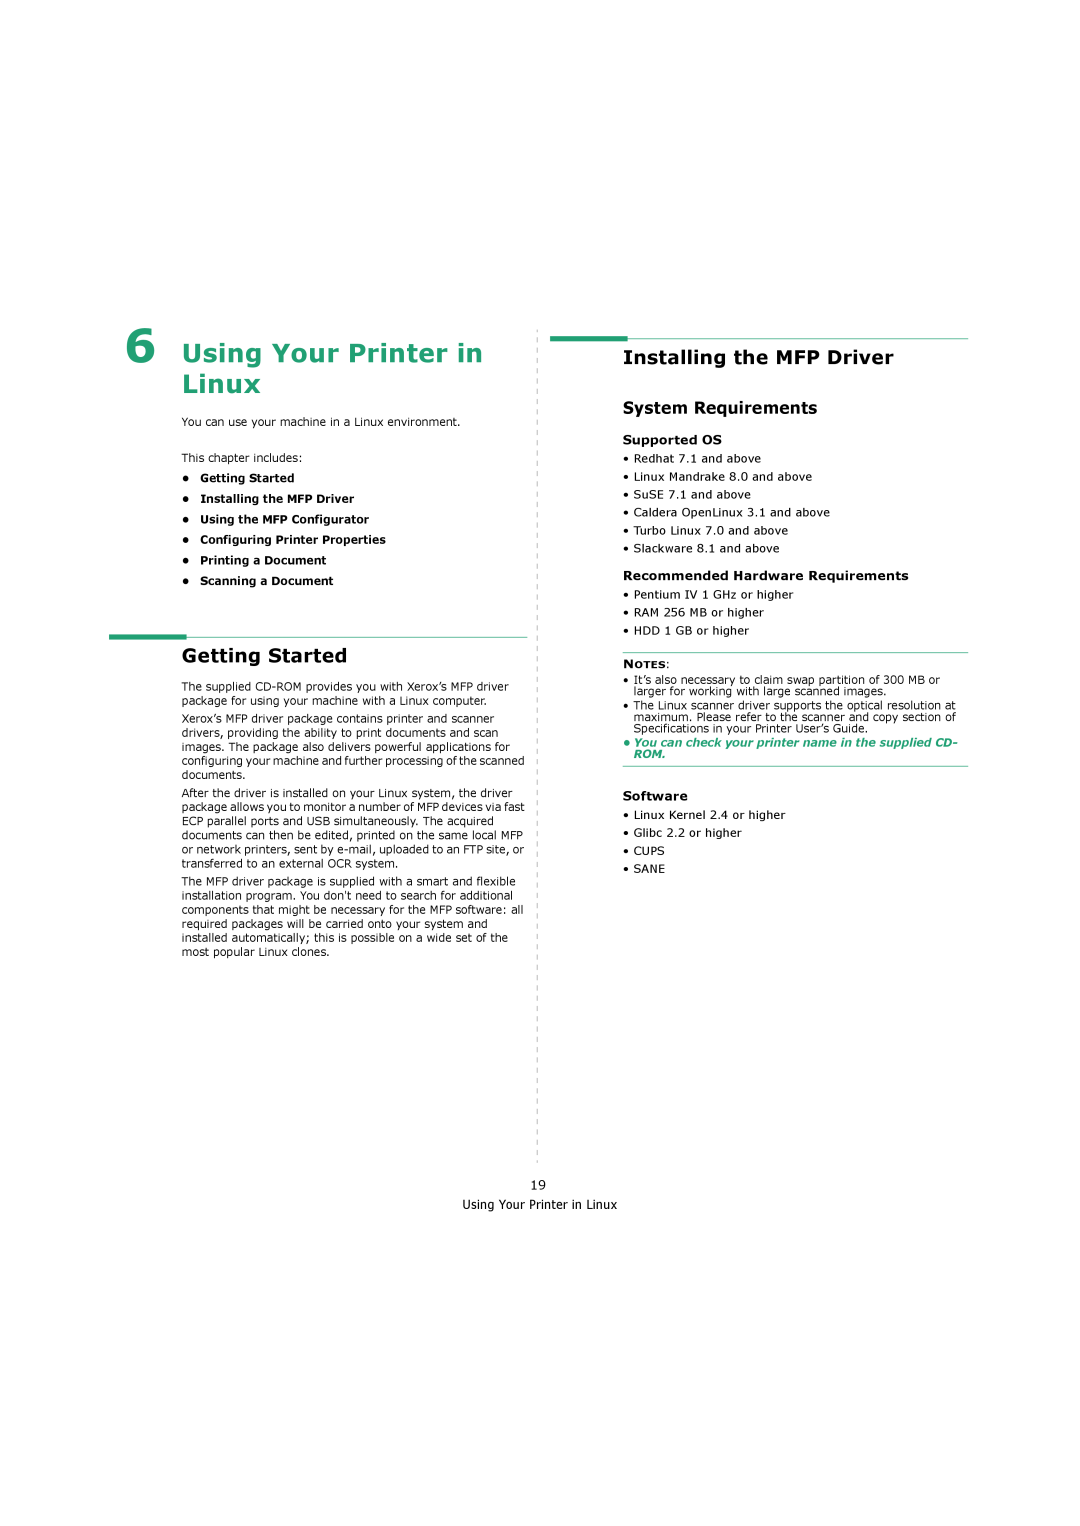 Xerox 3119 manual Using Your Printer in Linux, Installing the MFP Driver, Getting Started, System Requirements 